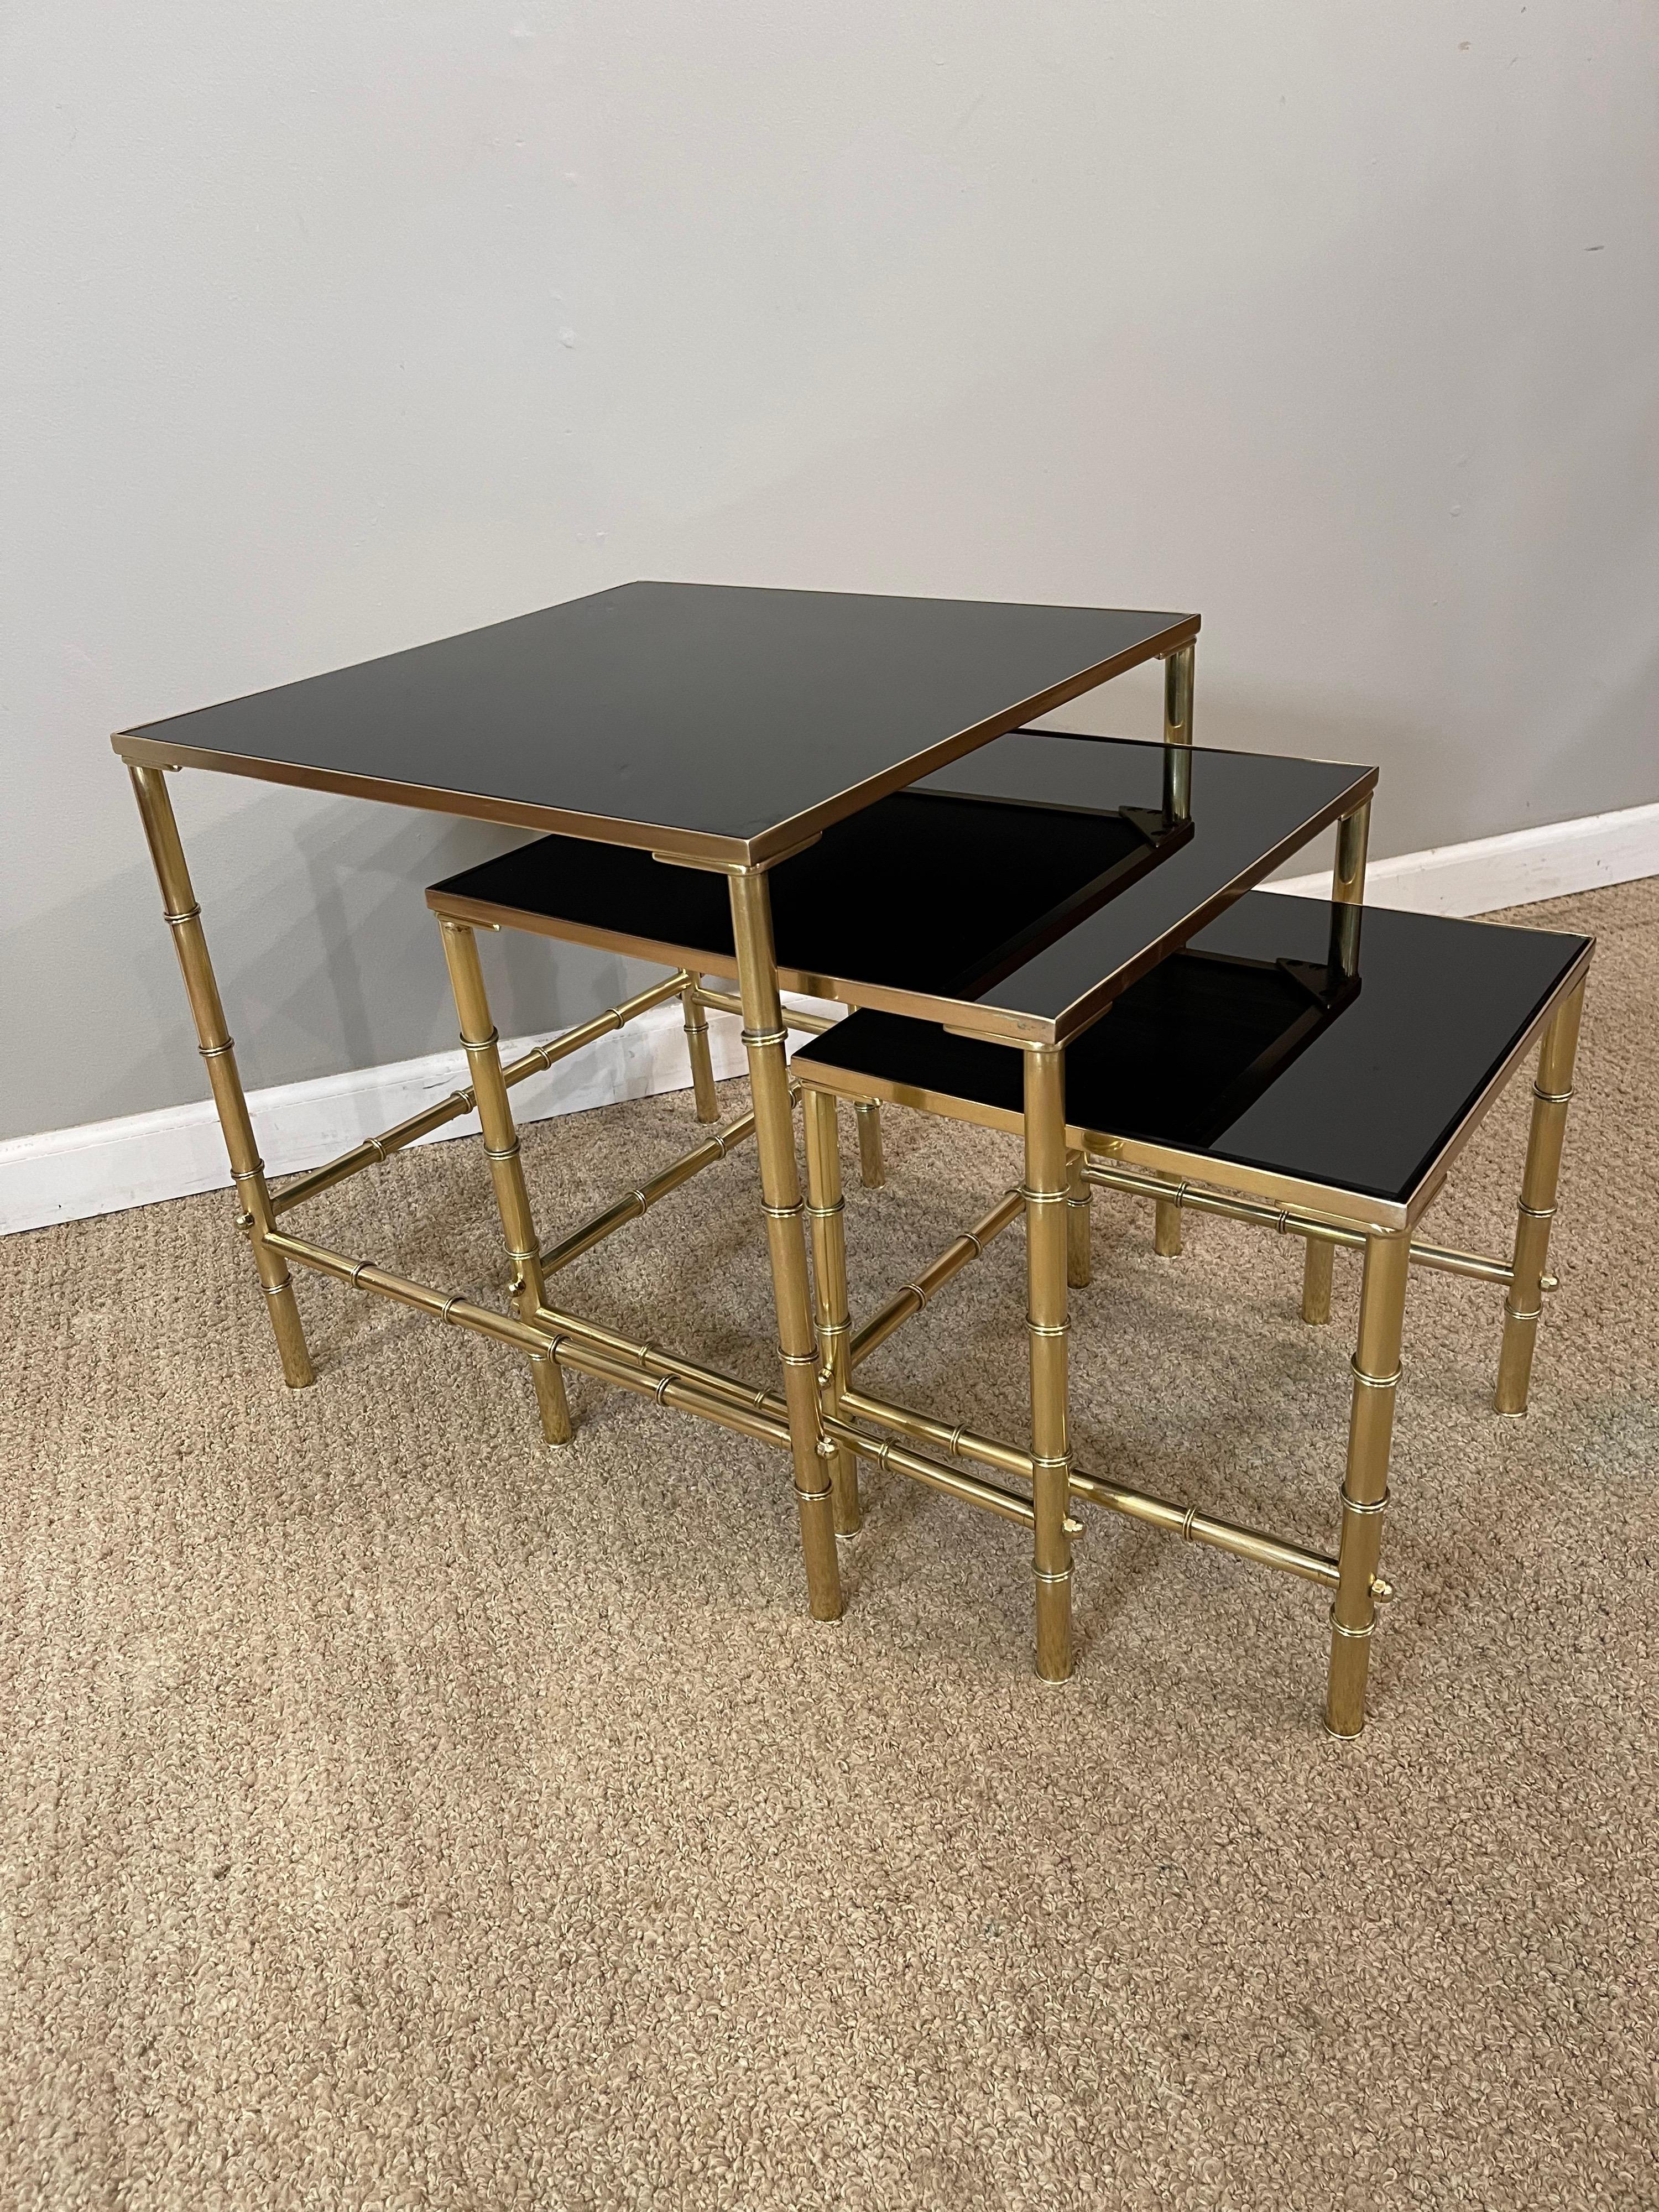 A beautiful set of Mid-Century Modern, Jansen nesting tables with 

Black glass top. Brass has been polished & sealed. Tables retain the

Original glass, glass has minor scratches consistent with age & use.